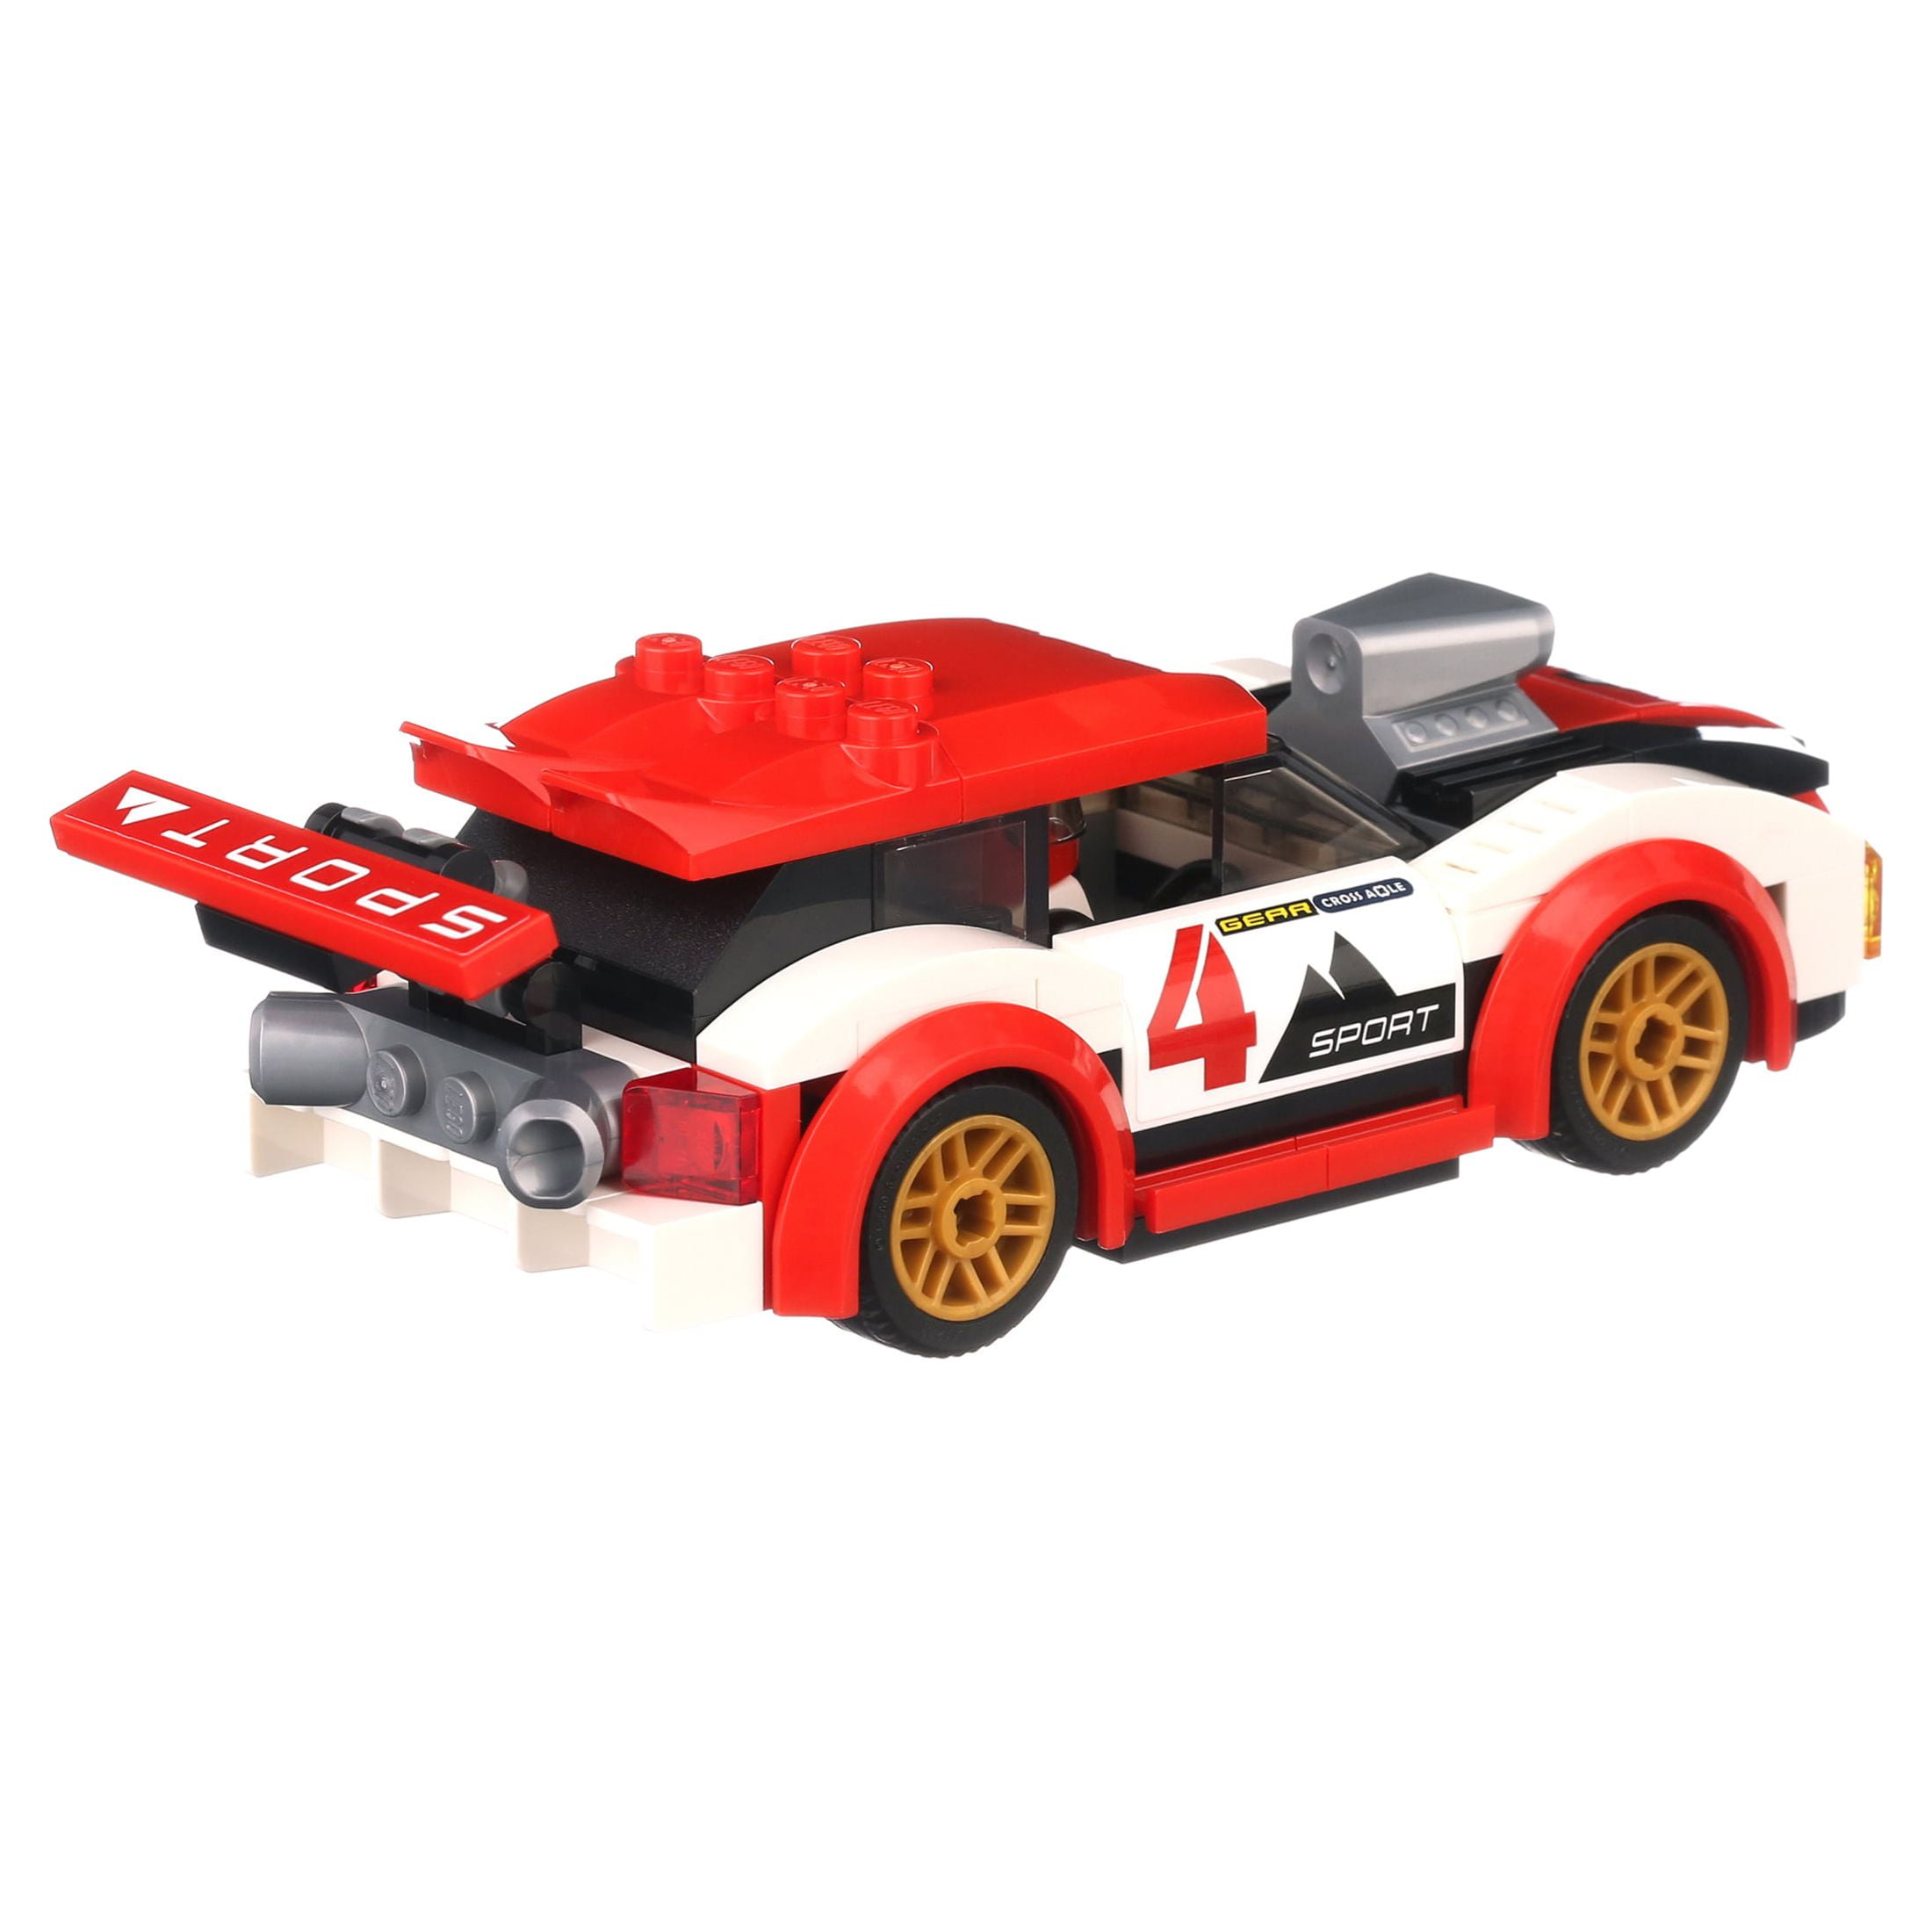 LEGO City Racing Cars 60256 Buildable Toy for Kids (190 Pieces)